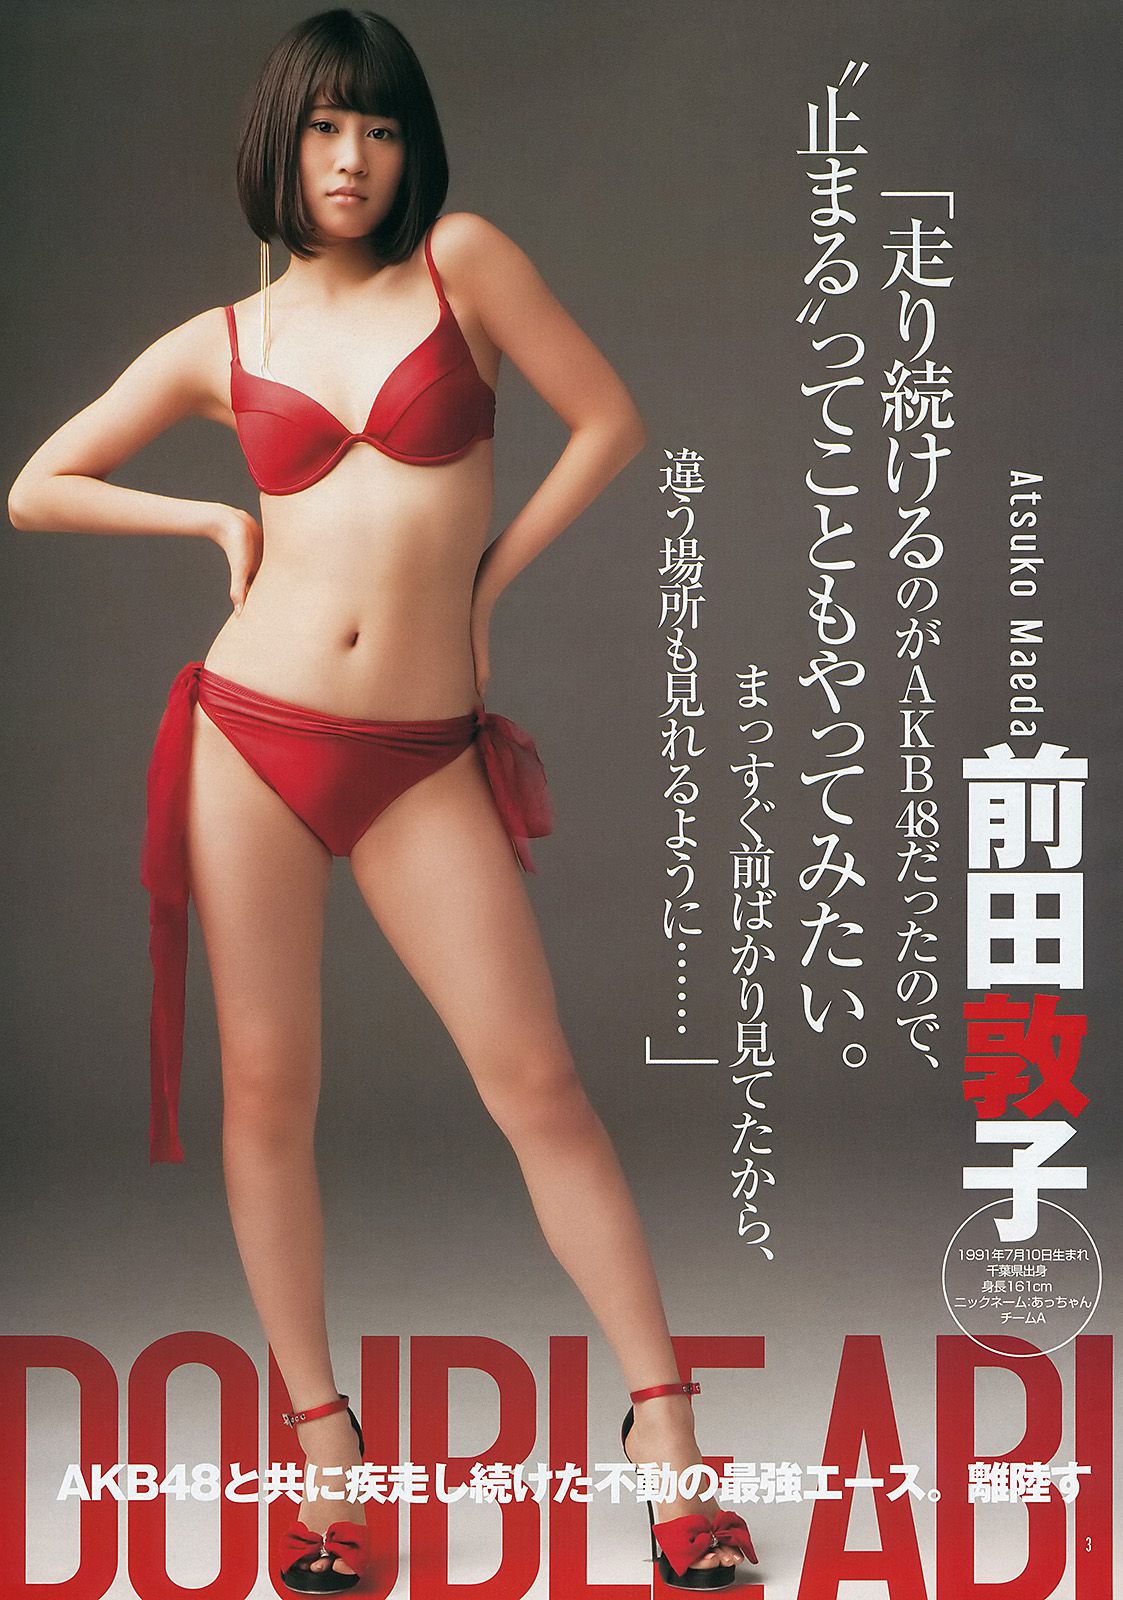 AKB48 《DOUBLE ABILITY》 [Weekly Young Jump] 2012 No.26 Photo Magazine Page 7 No.2975f5